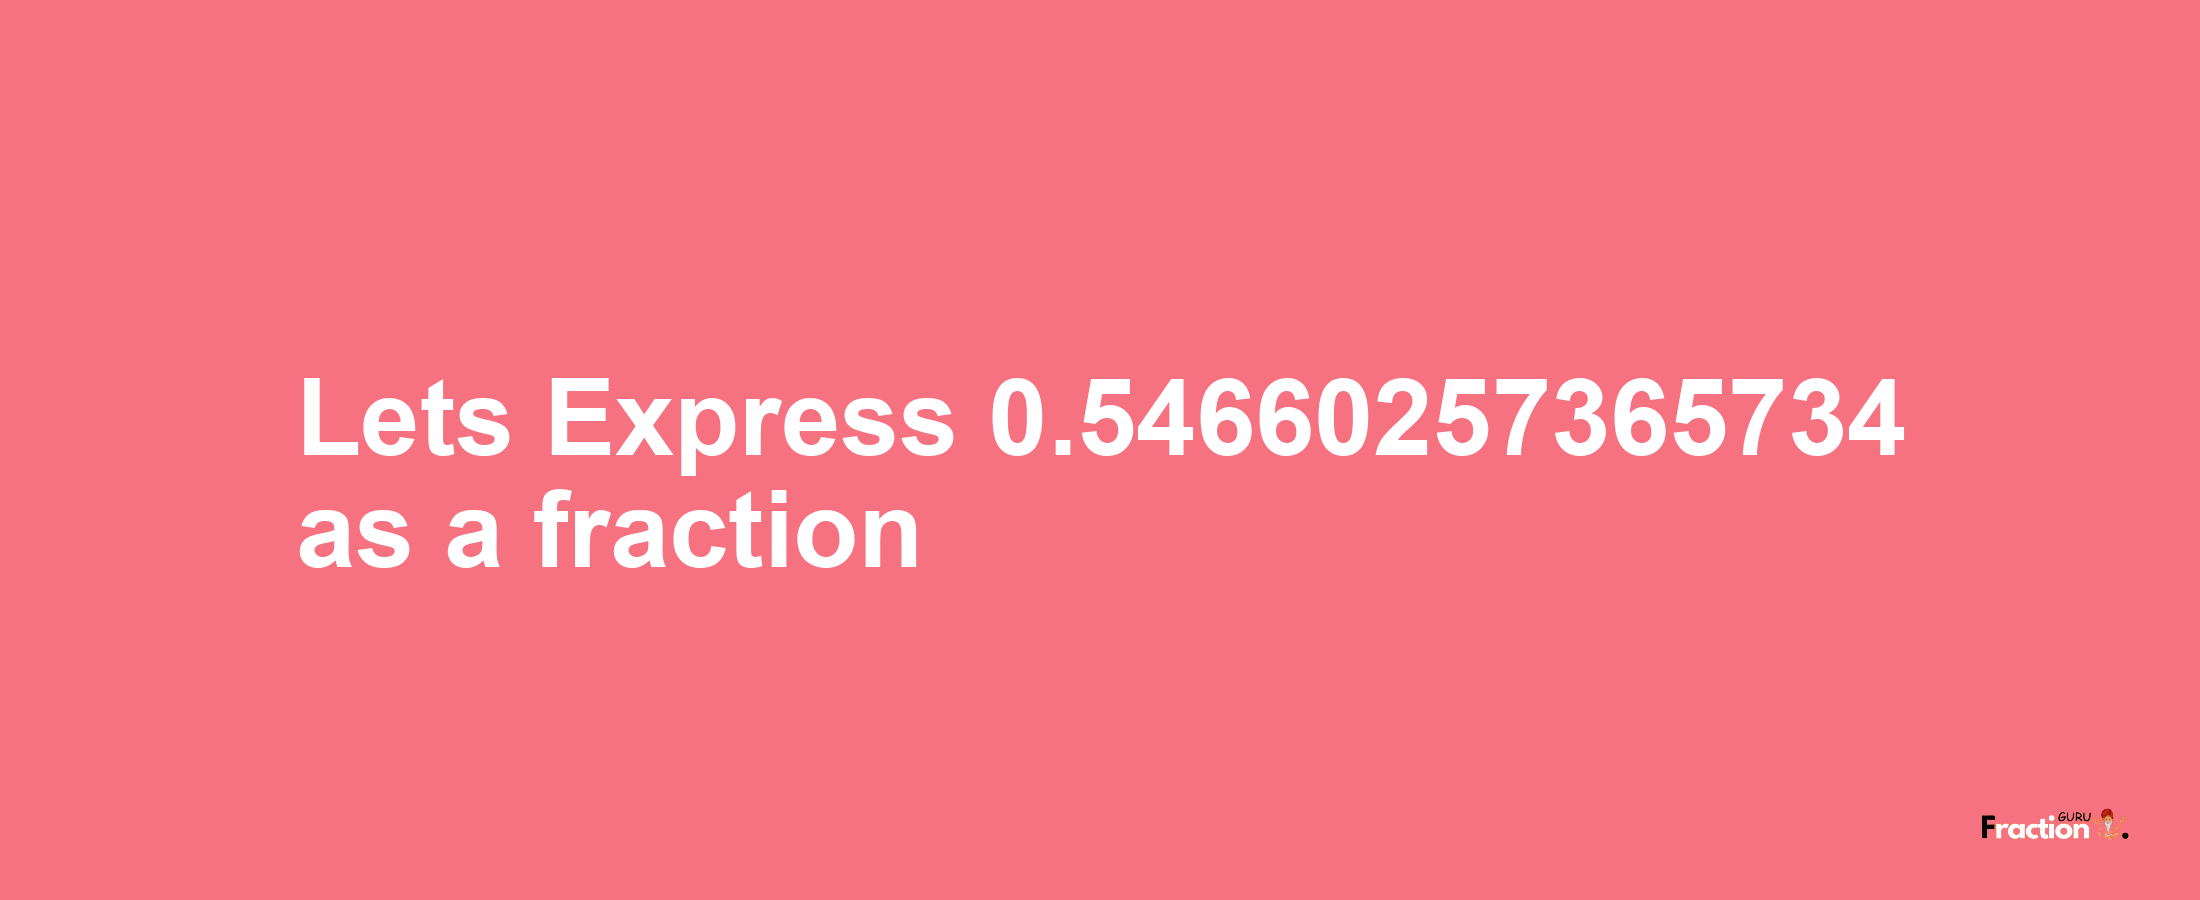 Lets Express 0.54660257365734 as afraction